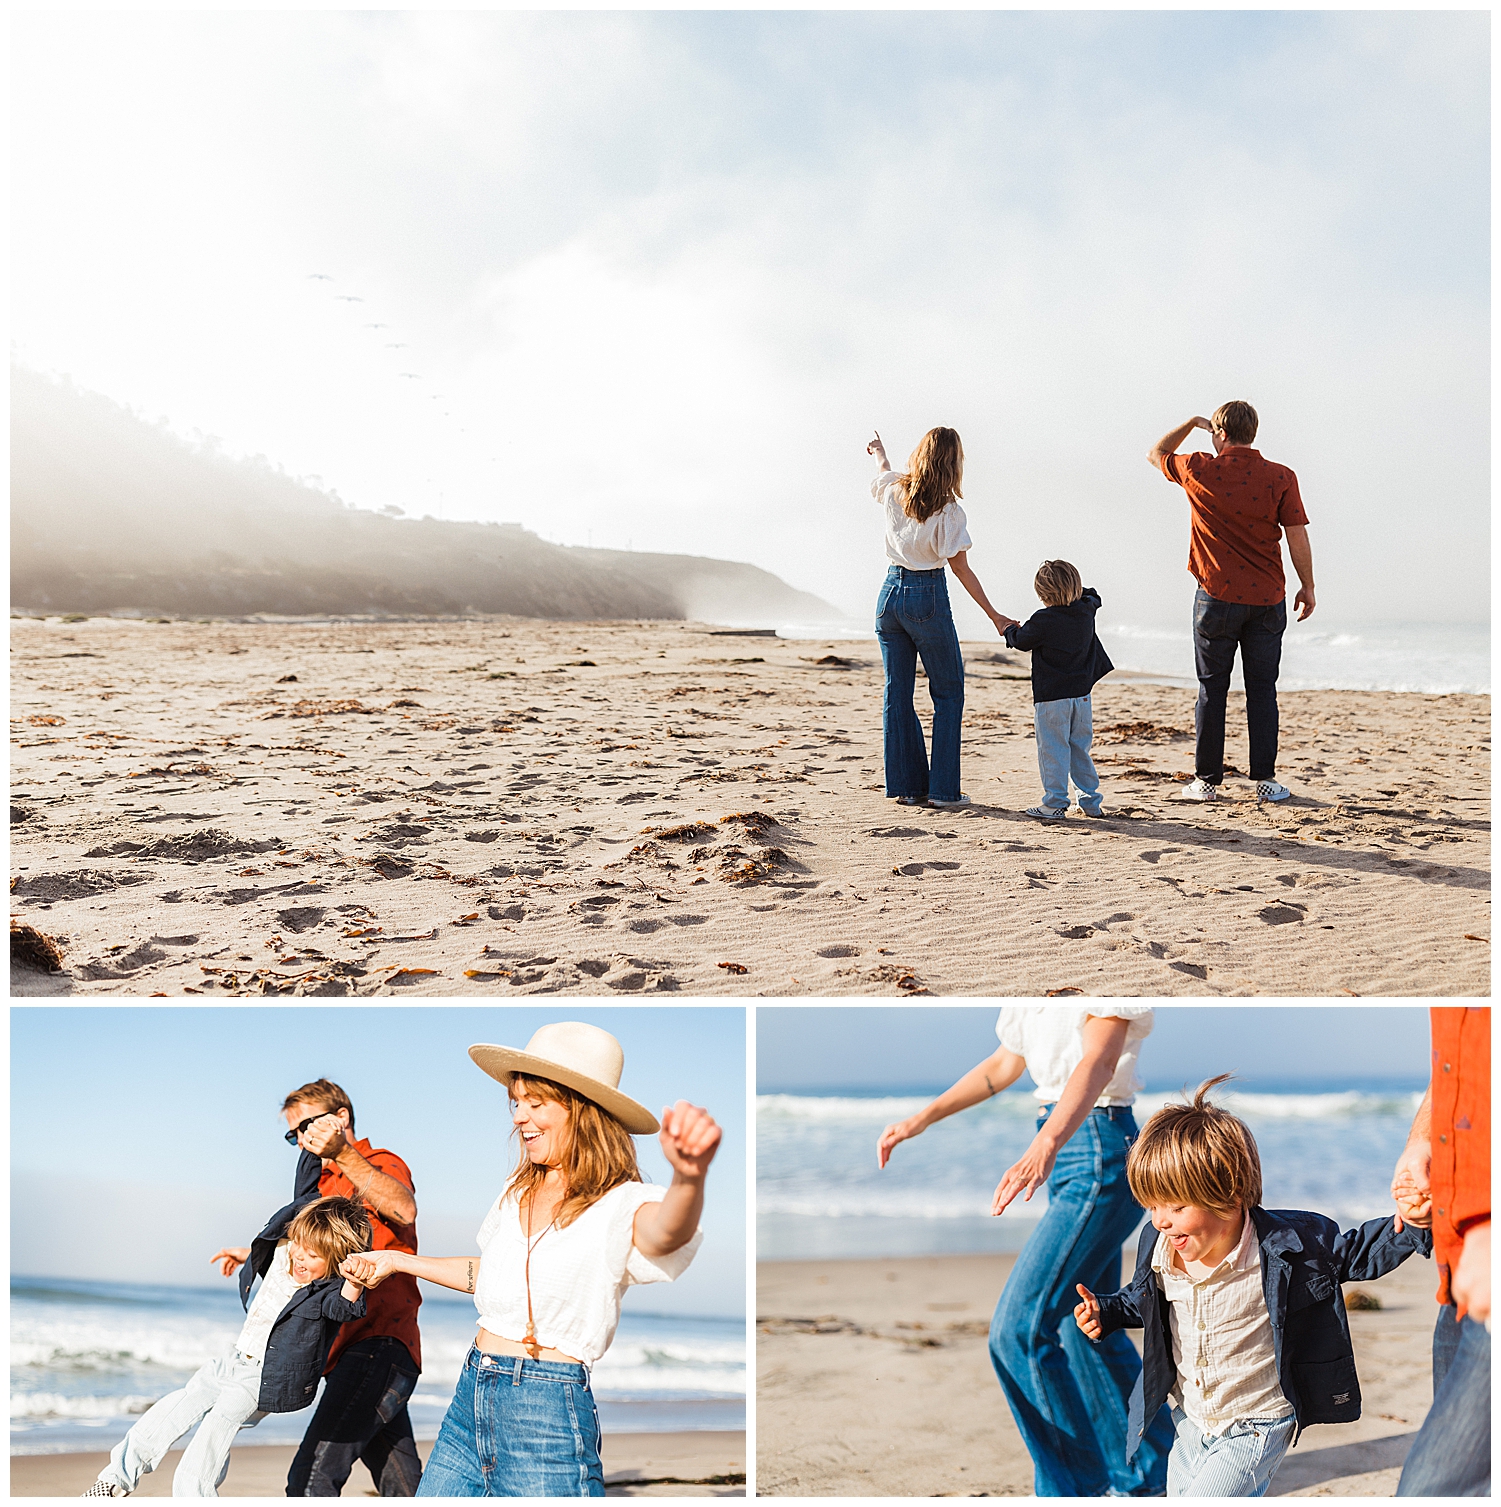 skyler maire photography, what to wear for outdoor family photos, beach family photos